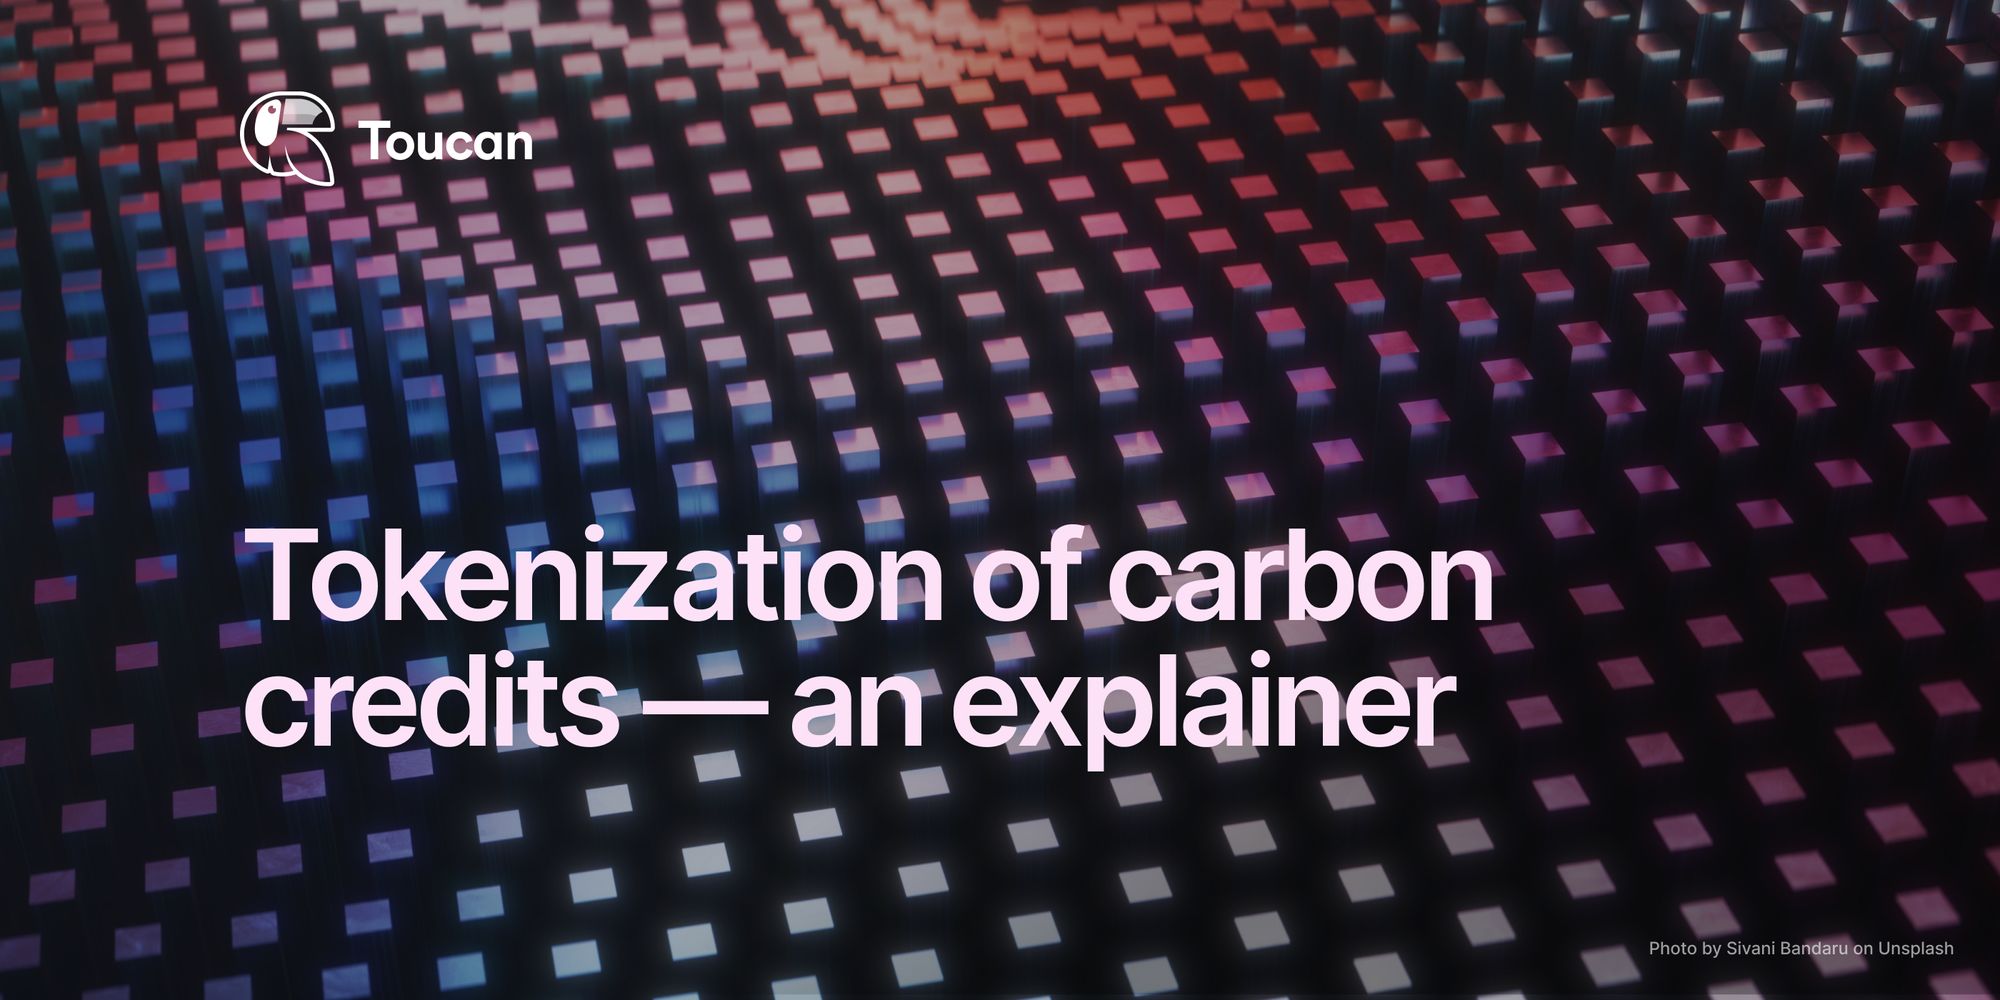 Why data matters for high-integrity carbon markets